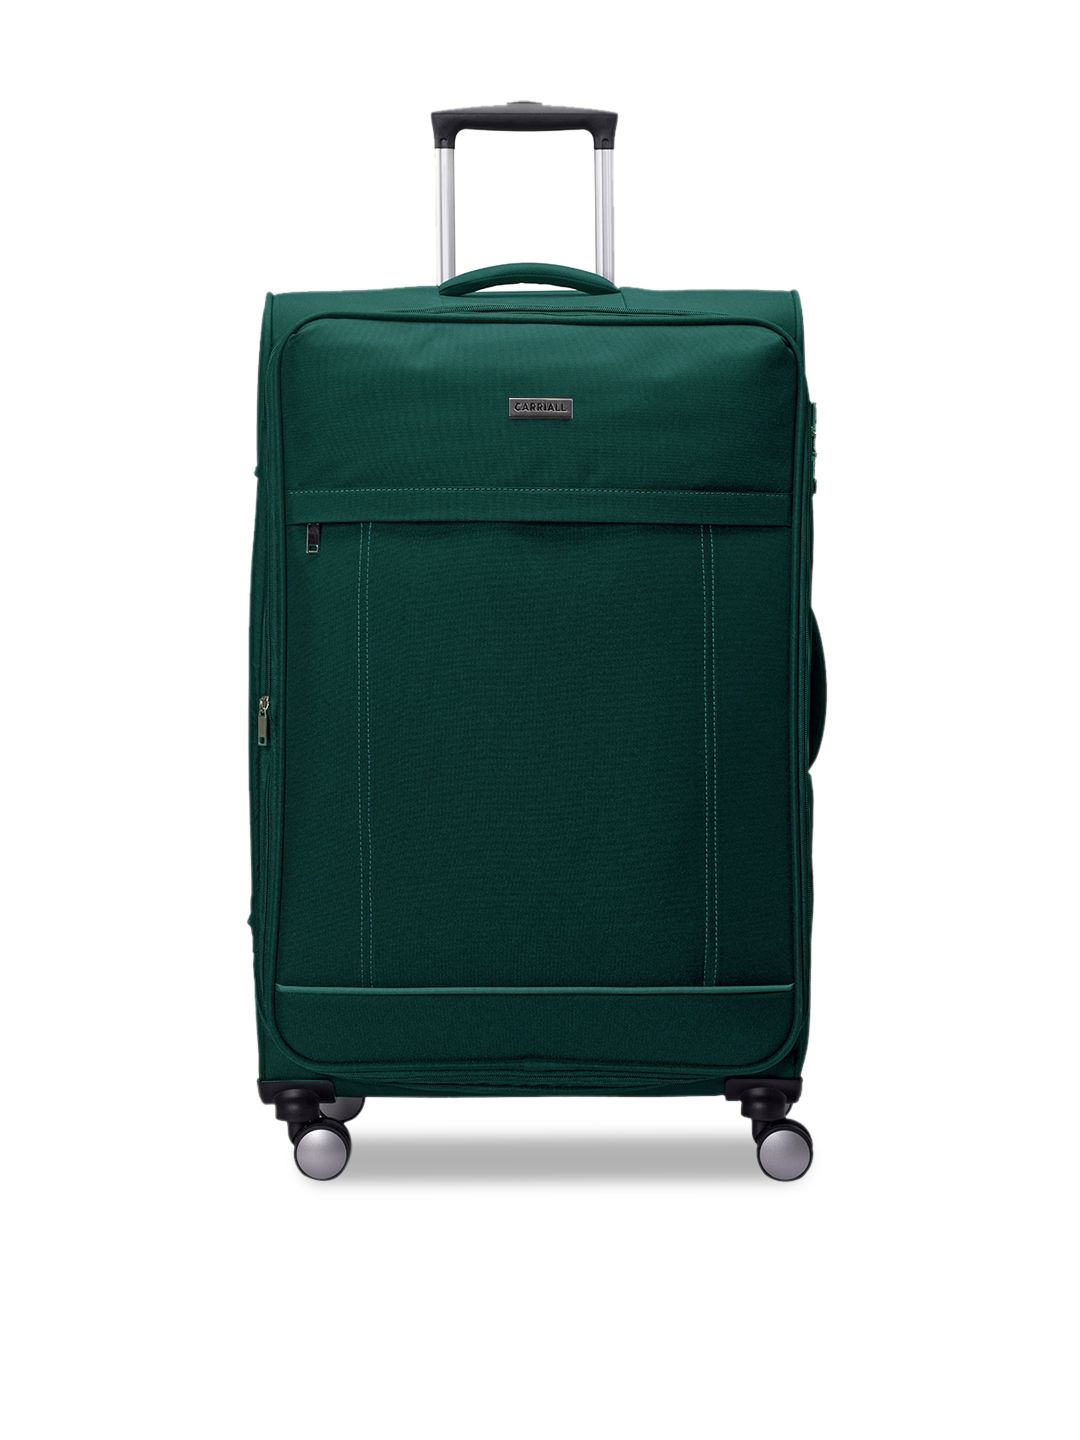 CARRIALL Green Solid Soft-Sided Large Trolley Suitcase Price in India